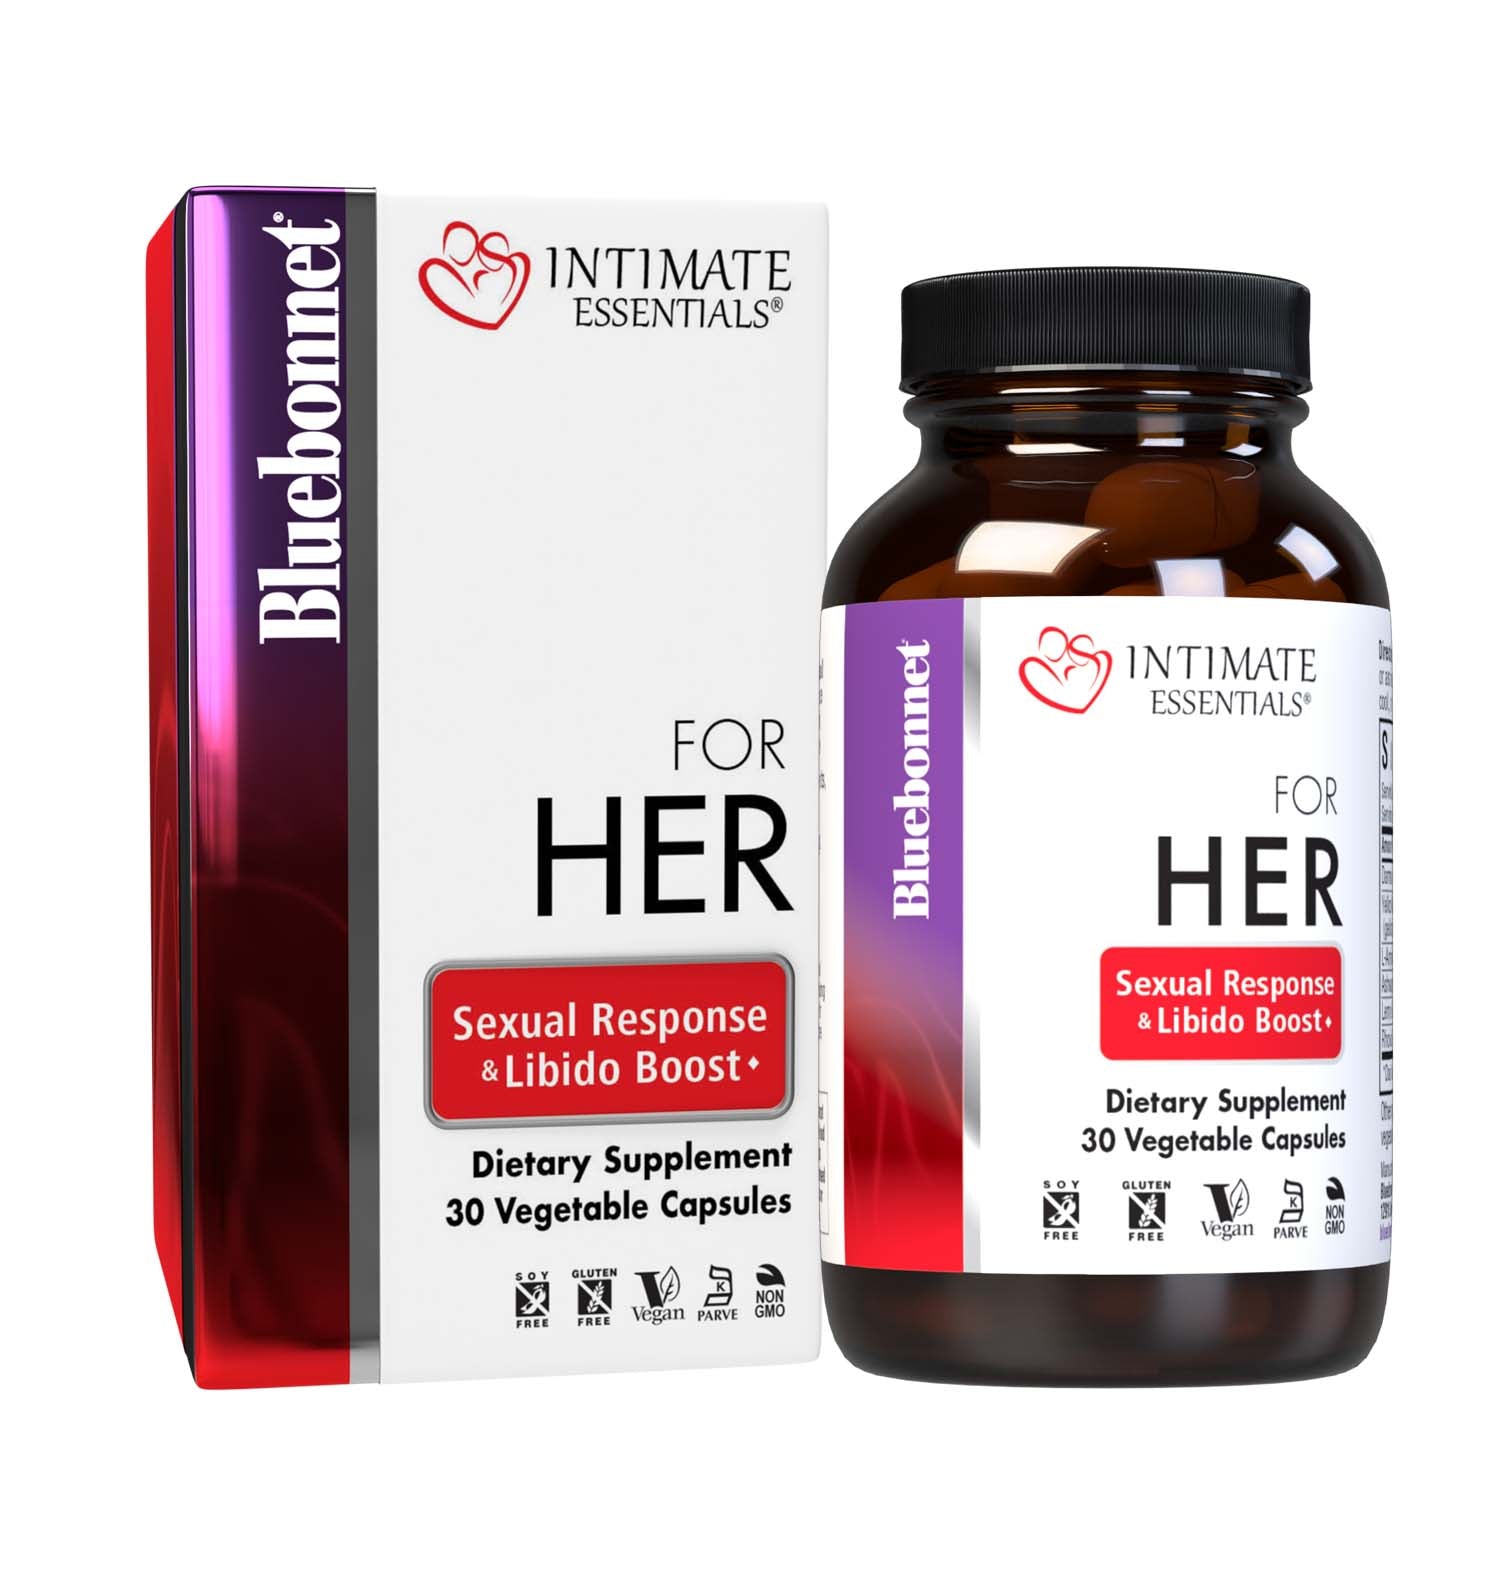 Bluebonnet’s Intimate Essentials For Her Sexual Response & Libido Boost Vegetable Capsules are specially formulated to help stimulate a woman’s sexual chemistry and intensify desire and libido. Bottle with box shot. #size_30 count